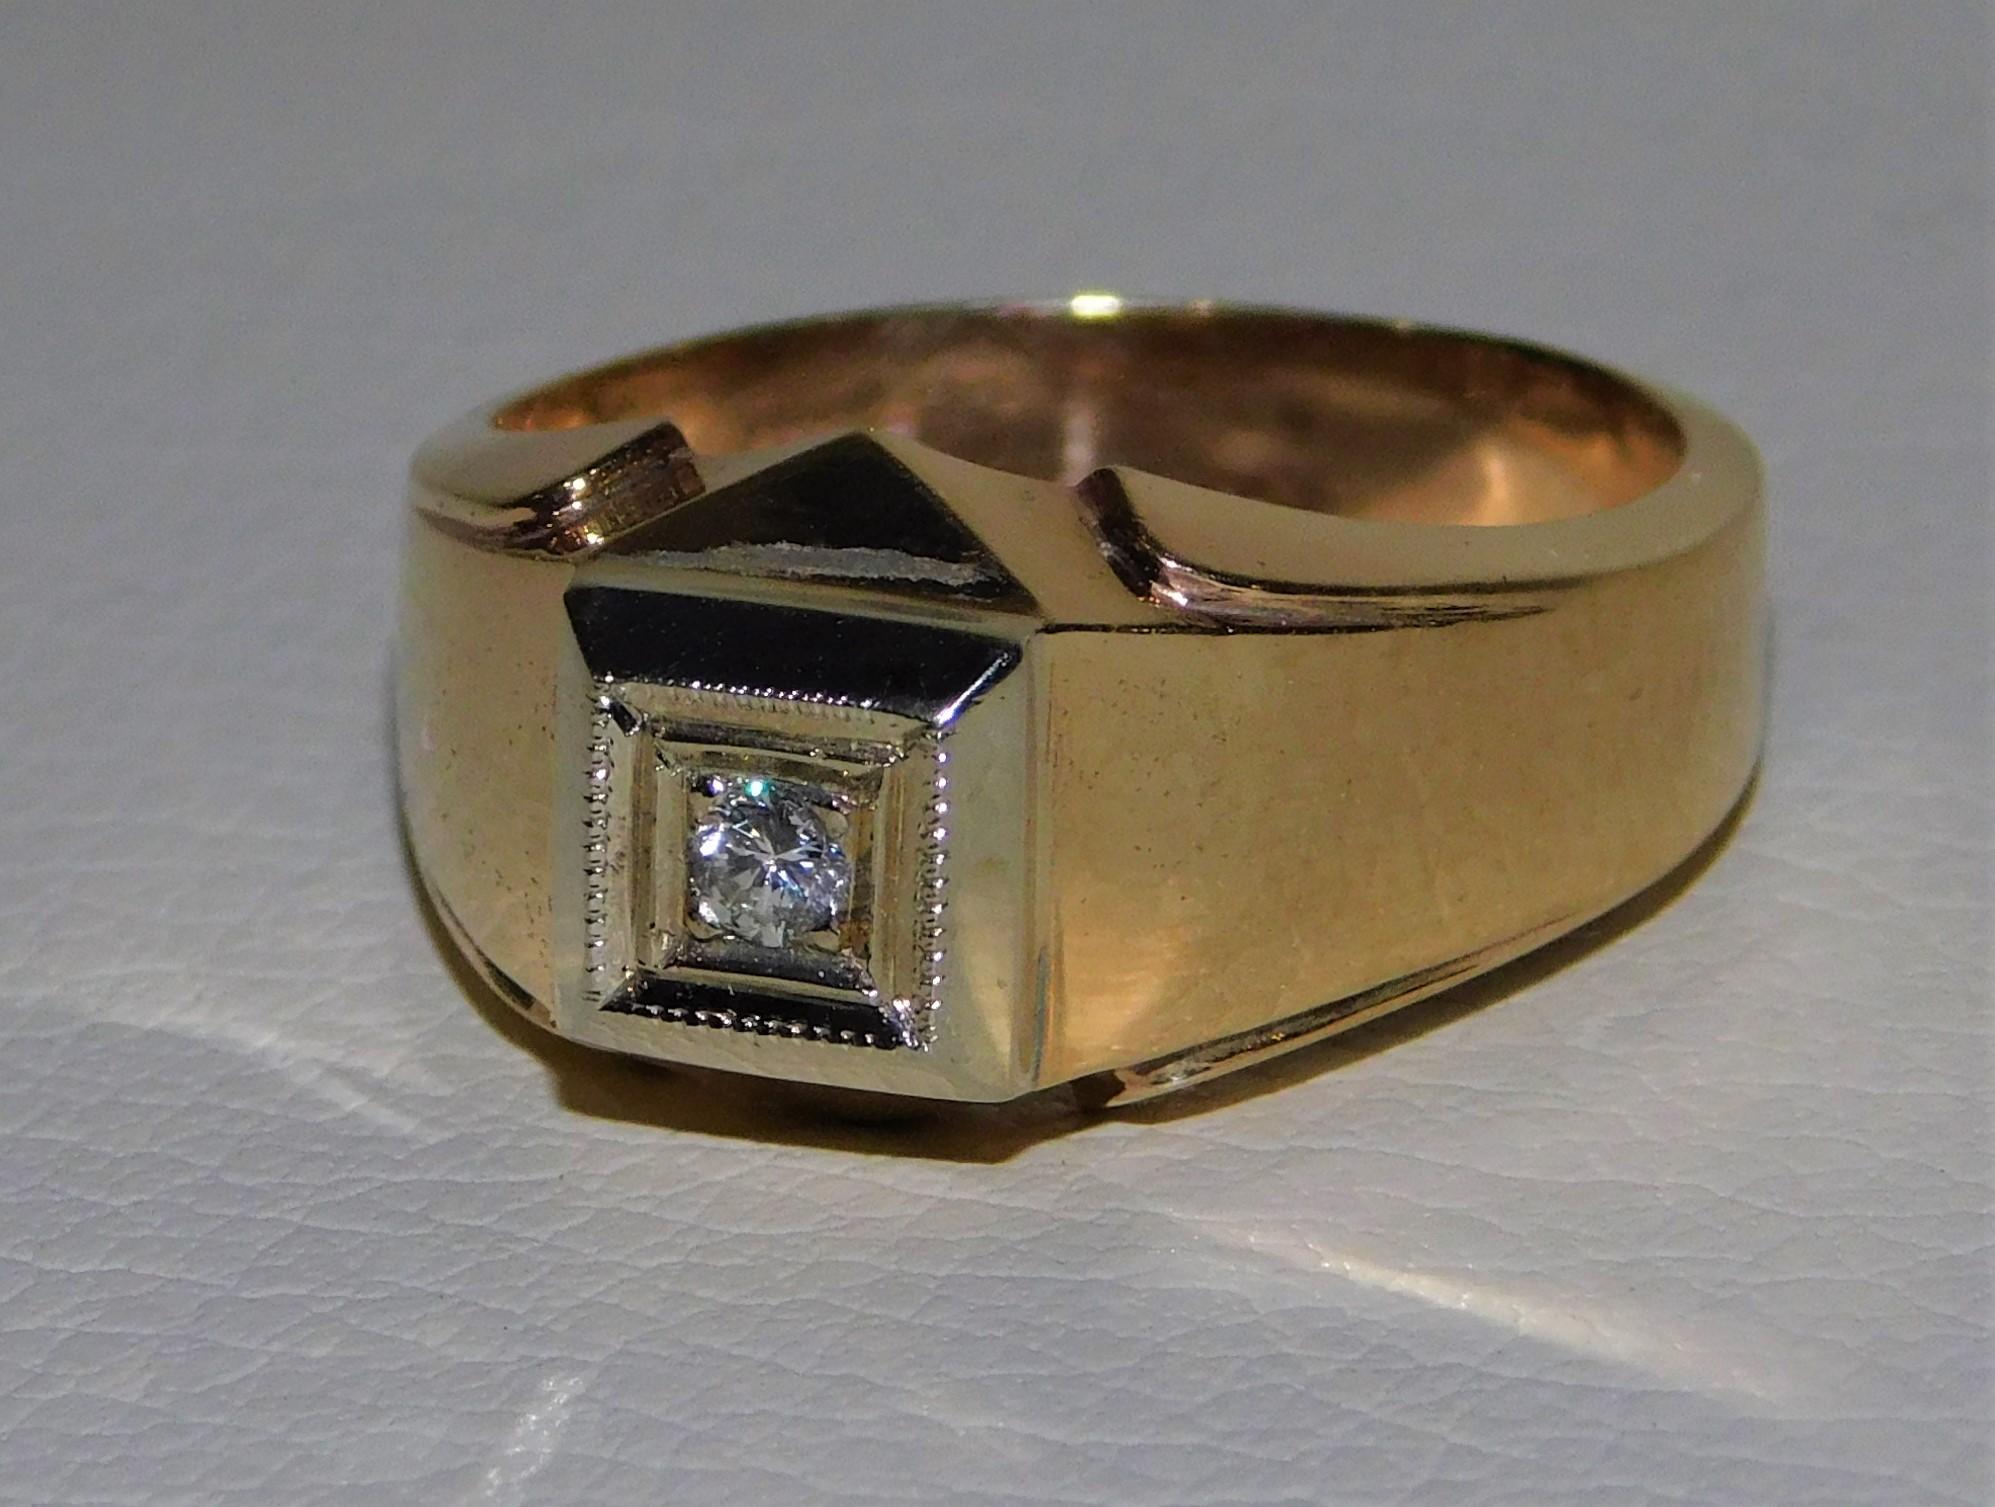 Stamped 14-karat yellow gold man's diamond ring with a bright polish and textured finish. Condition is very good. Square top ring with round brilliant cut diamond surrounded by a milgrain border. Ring measures approximately 11.25 mm at the widest